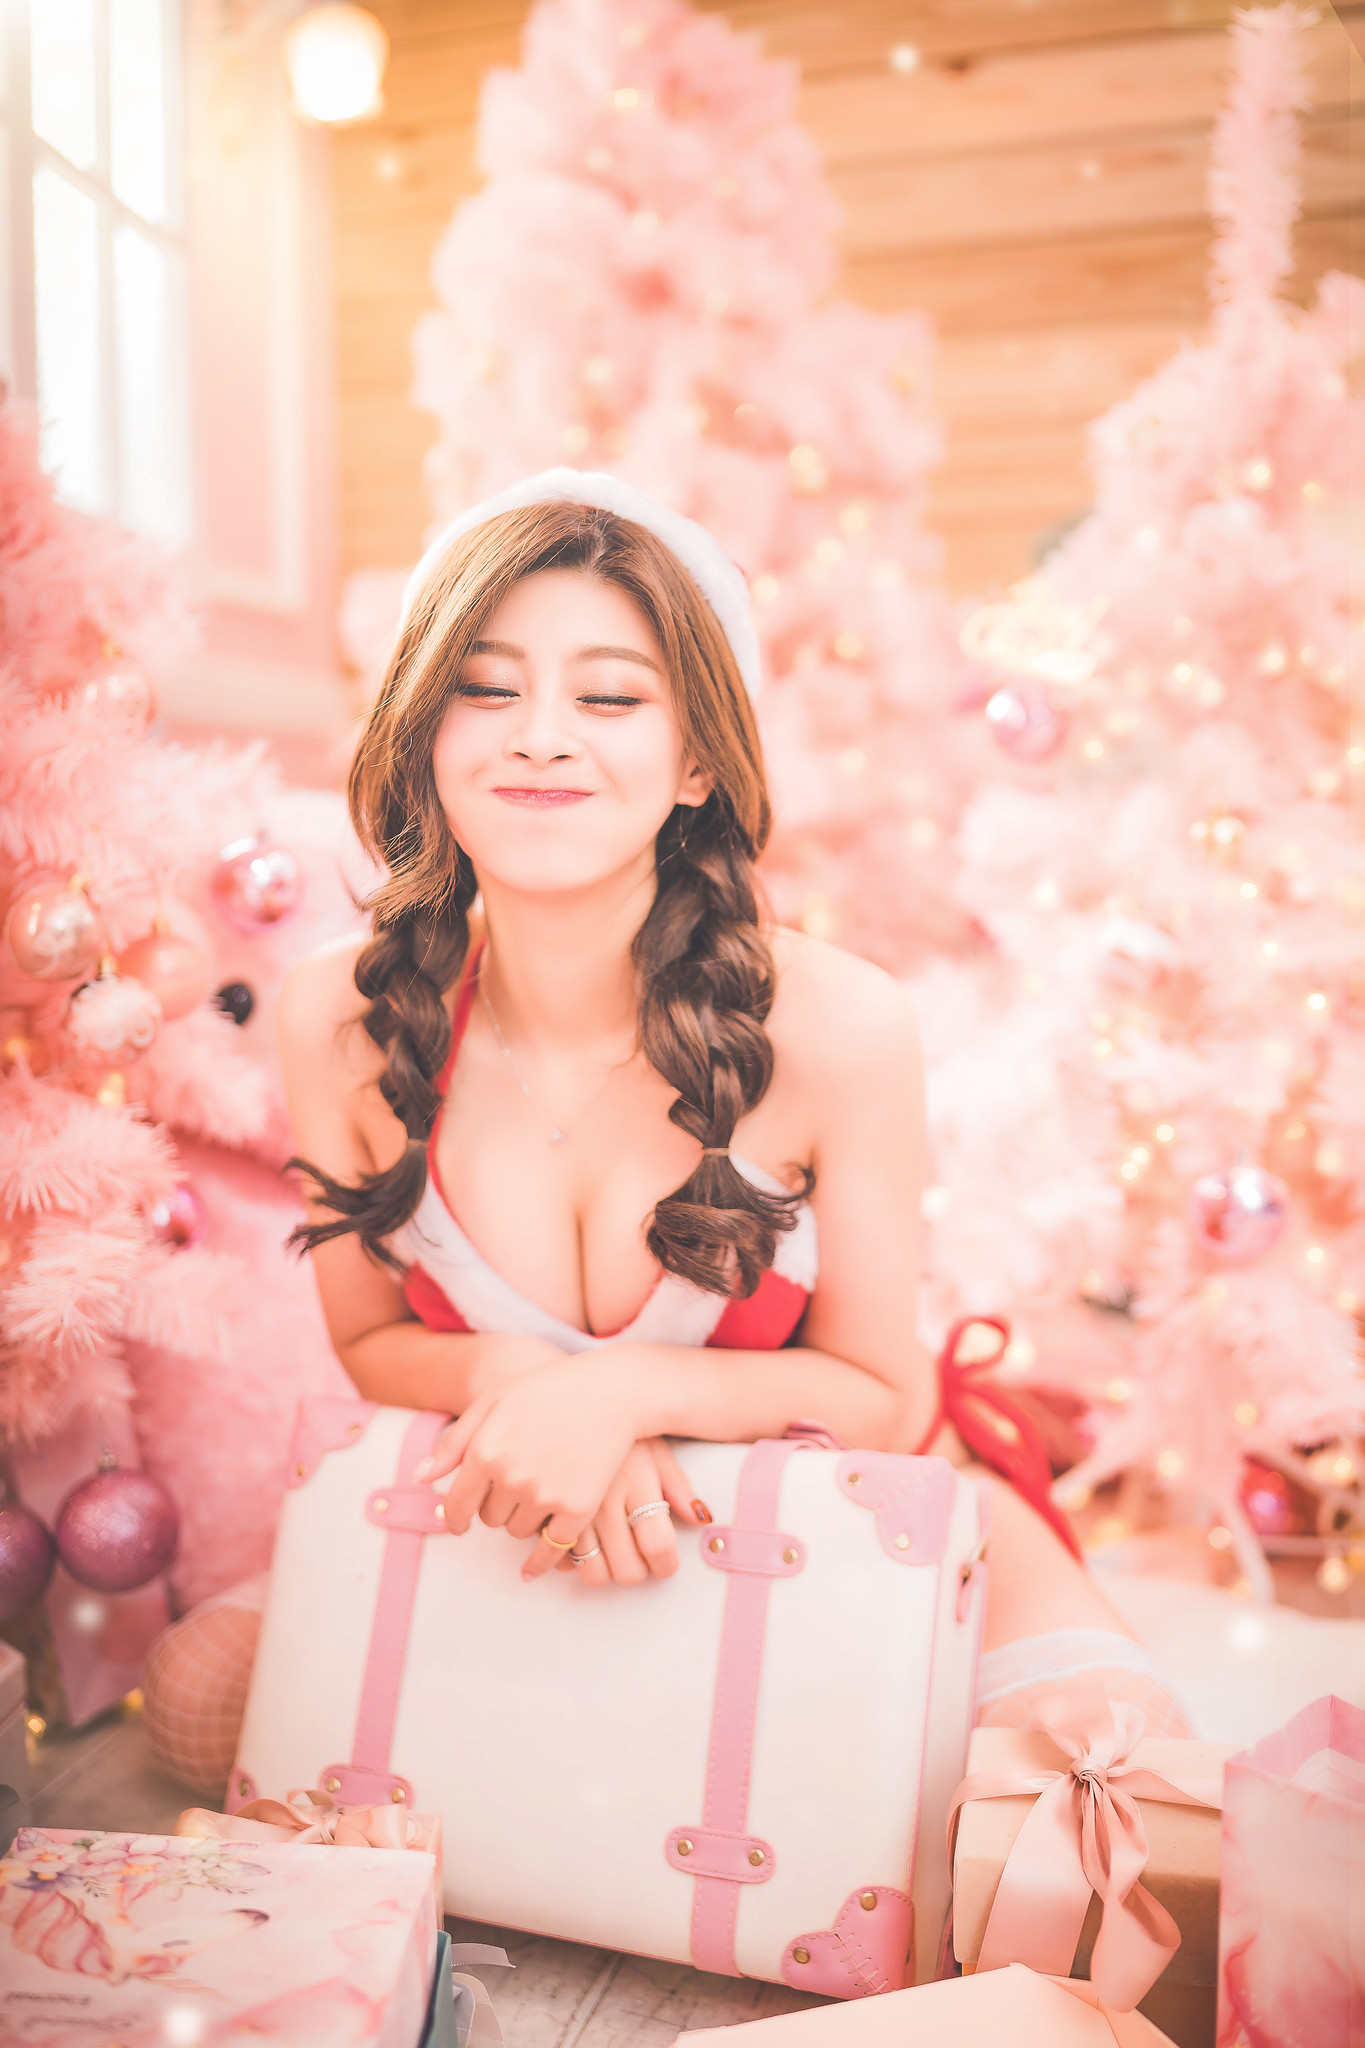 People 1365x2048 Christmas Christmas ornaments  women cleavage women indoors pink colorful dyed hair Christmas tree Christmas presents Chinese Chinese model curvy white stockings lace pale bare shoulders Asian Christmas women PinQ